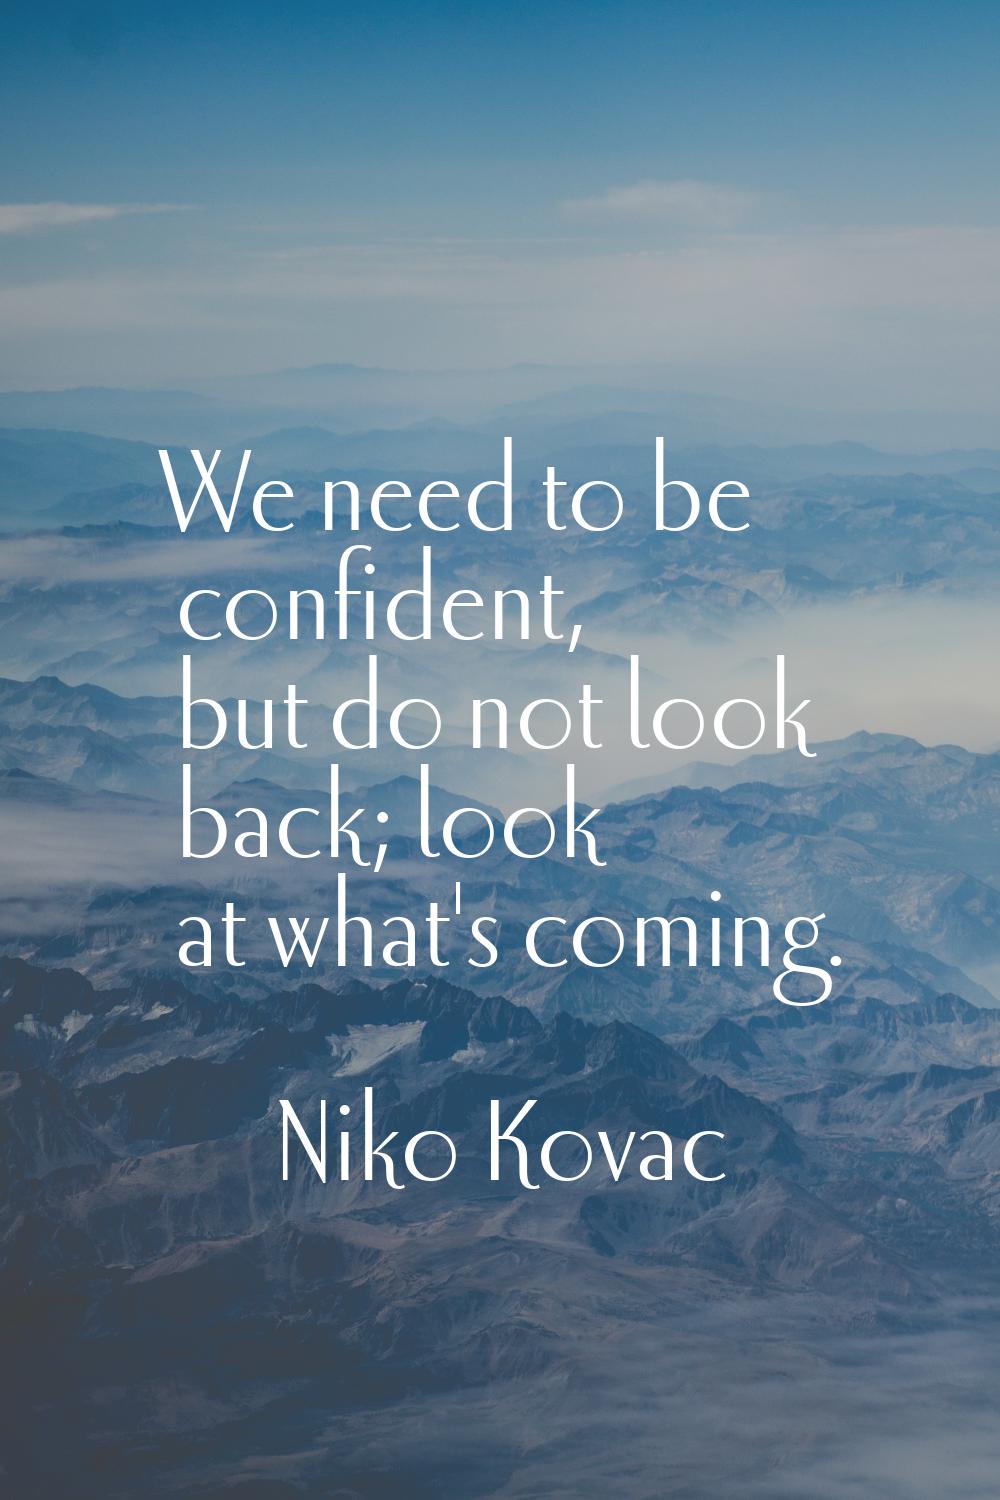 We need to be confident, but do not look back; look at what's coming.